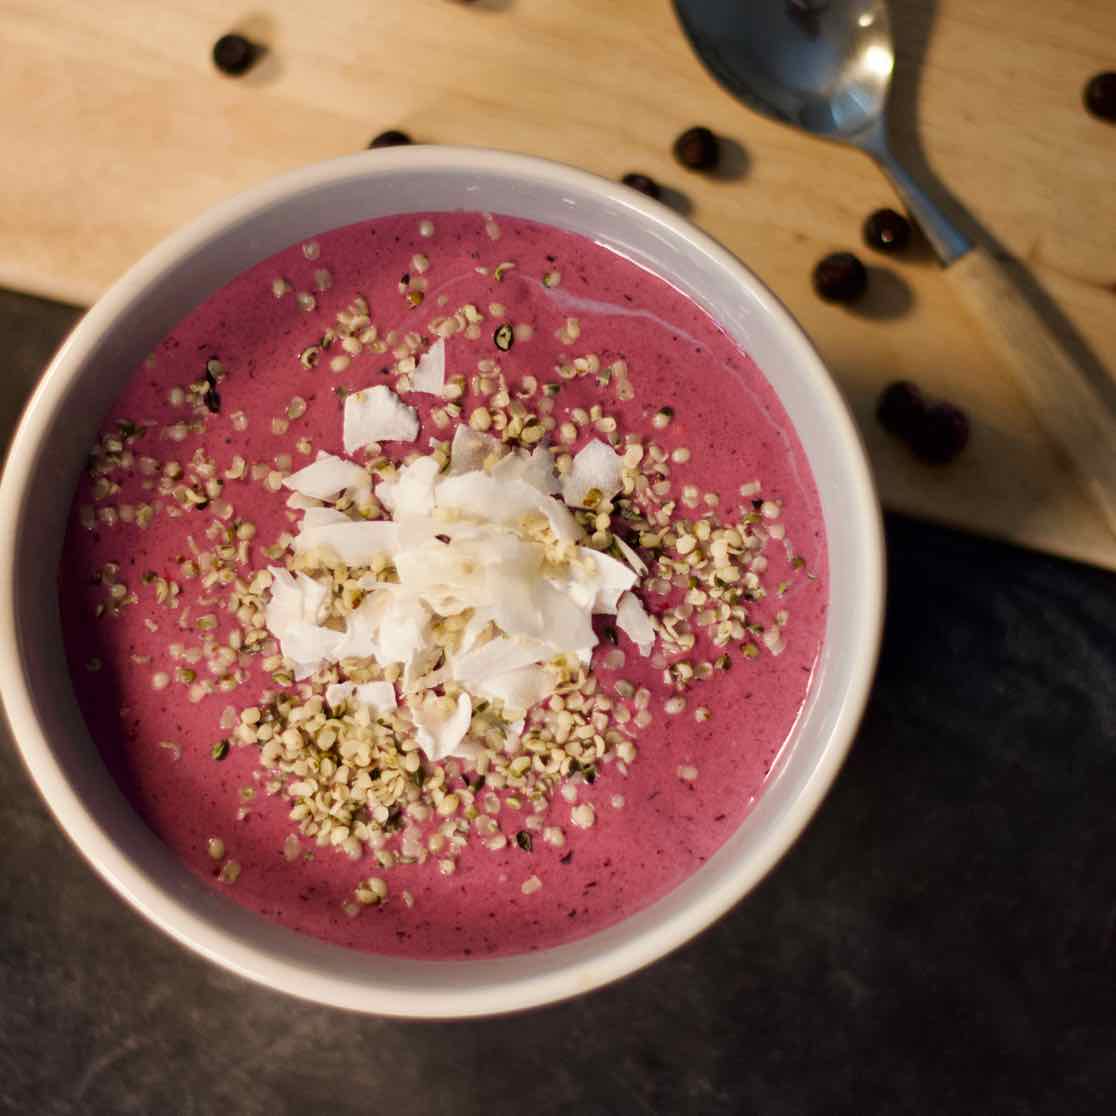 Smoothiebowl